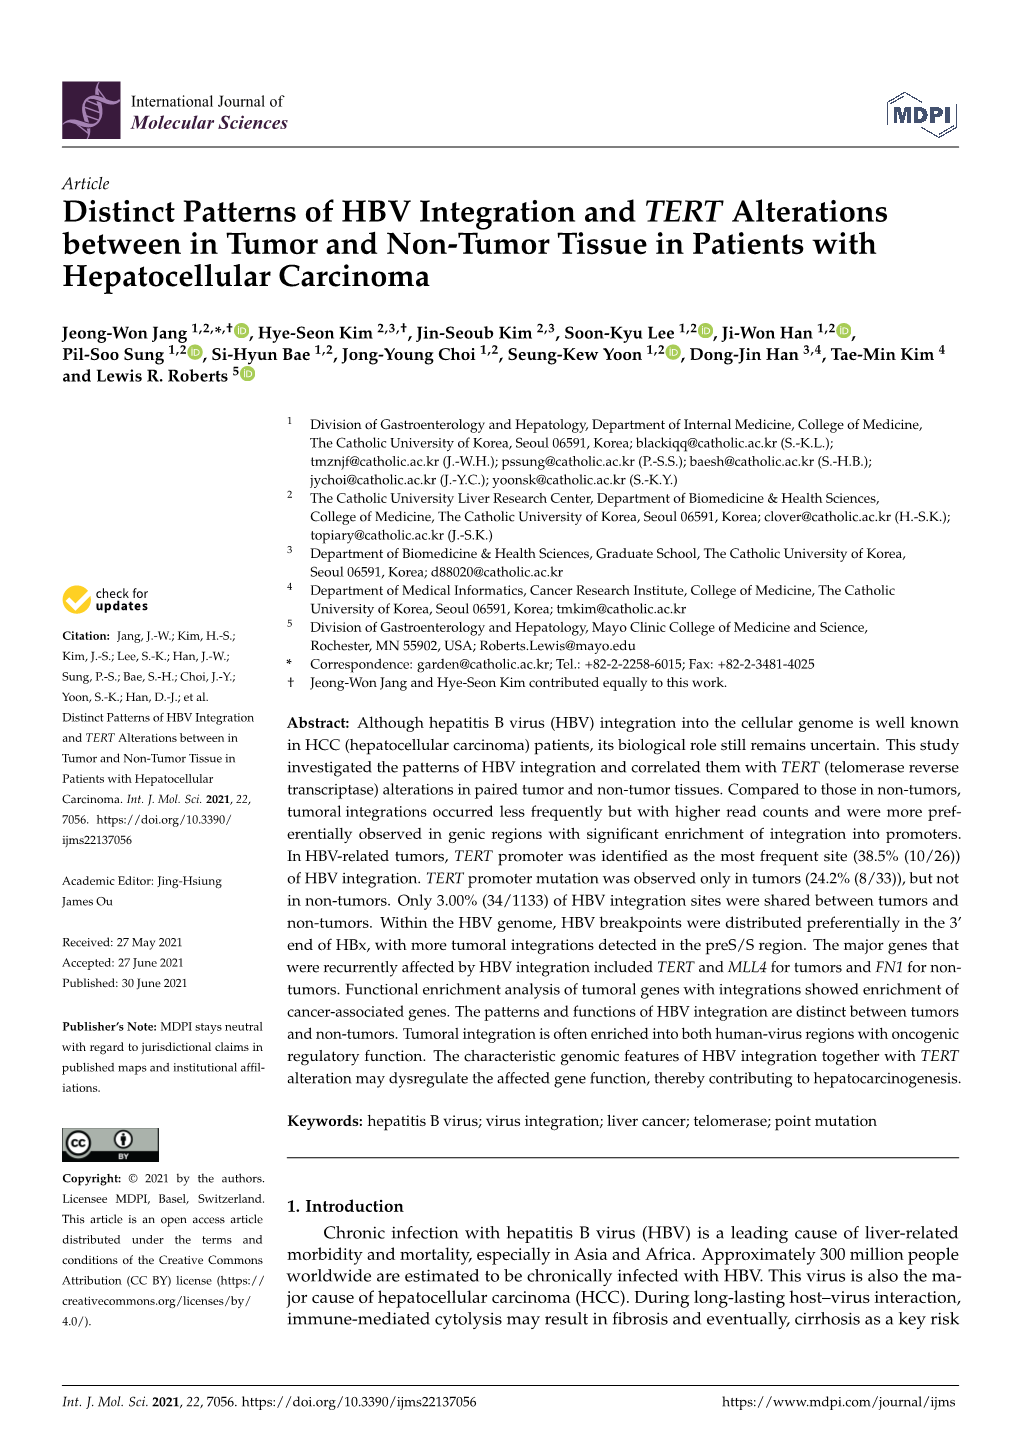 Distinct Patterns of HBV Integration and TERT Alterations Between in Tumor and Non-Tumor Tissue in Patients with Hepatocellular Carcinoma